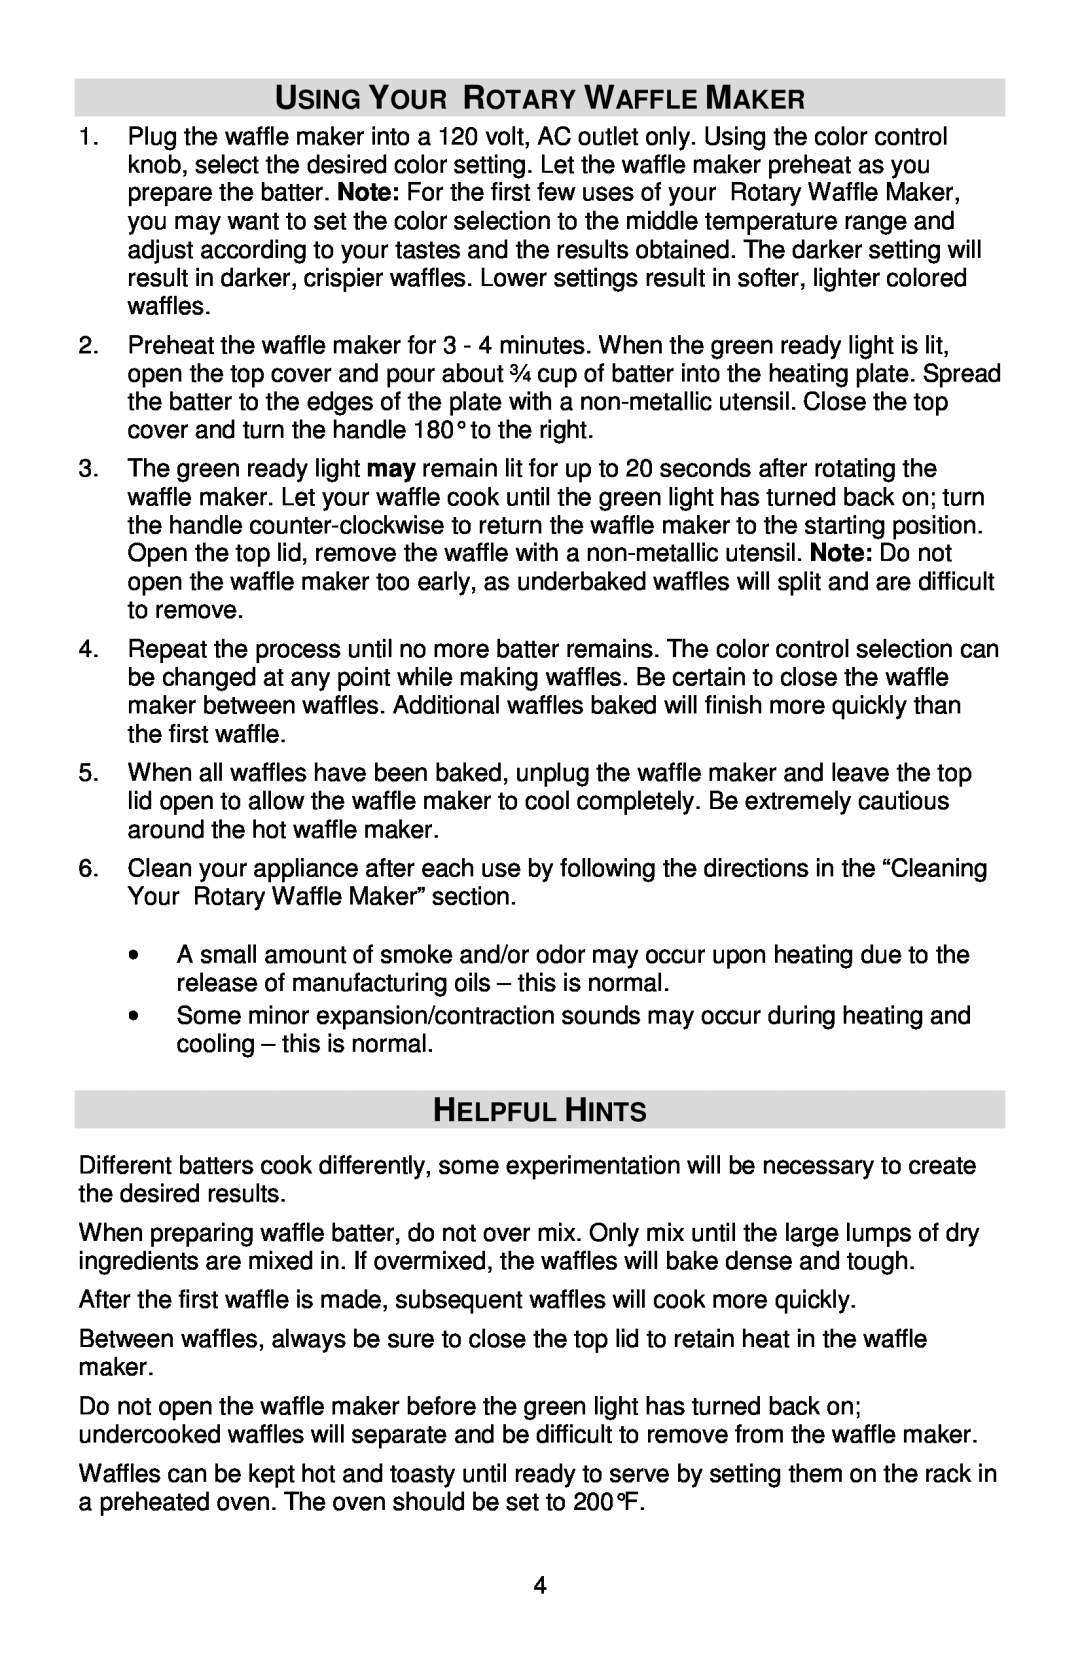 West Bend 6201 instruction manual Using Your Rotary Waffle Maker, Helpful Hints 